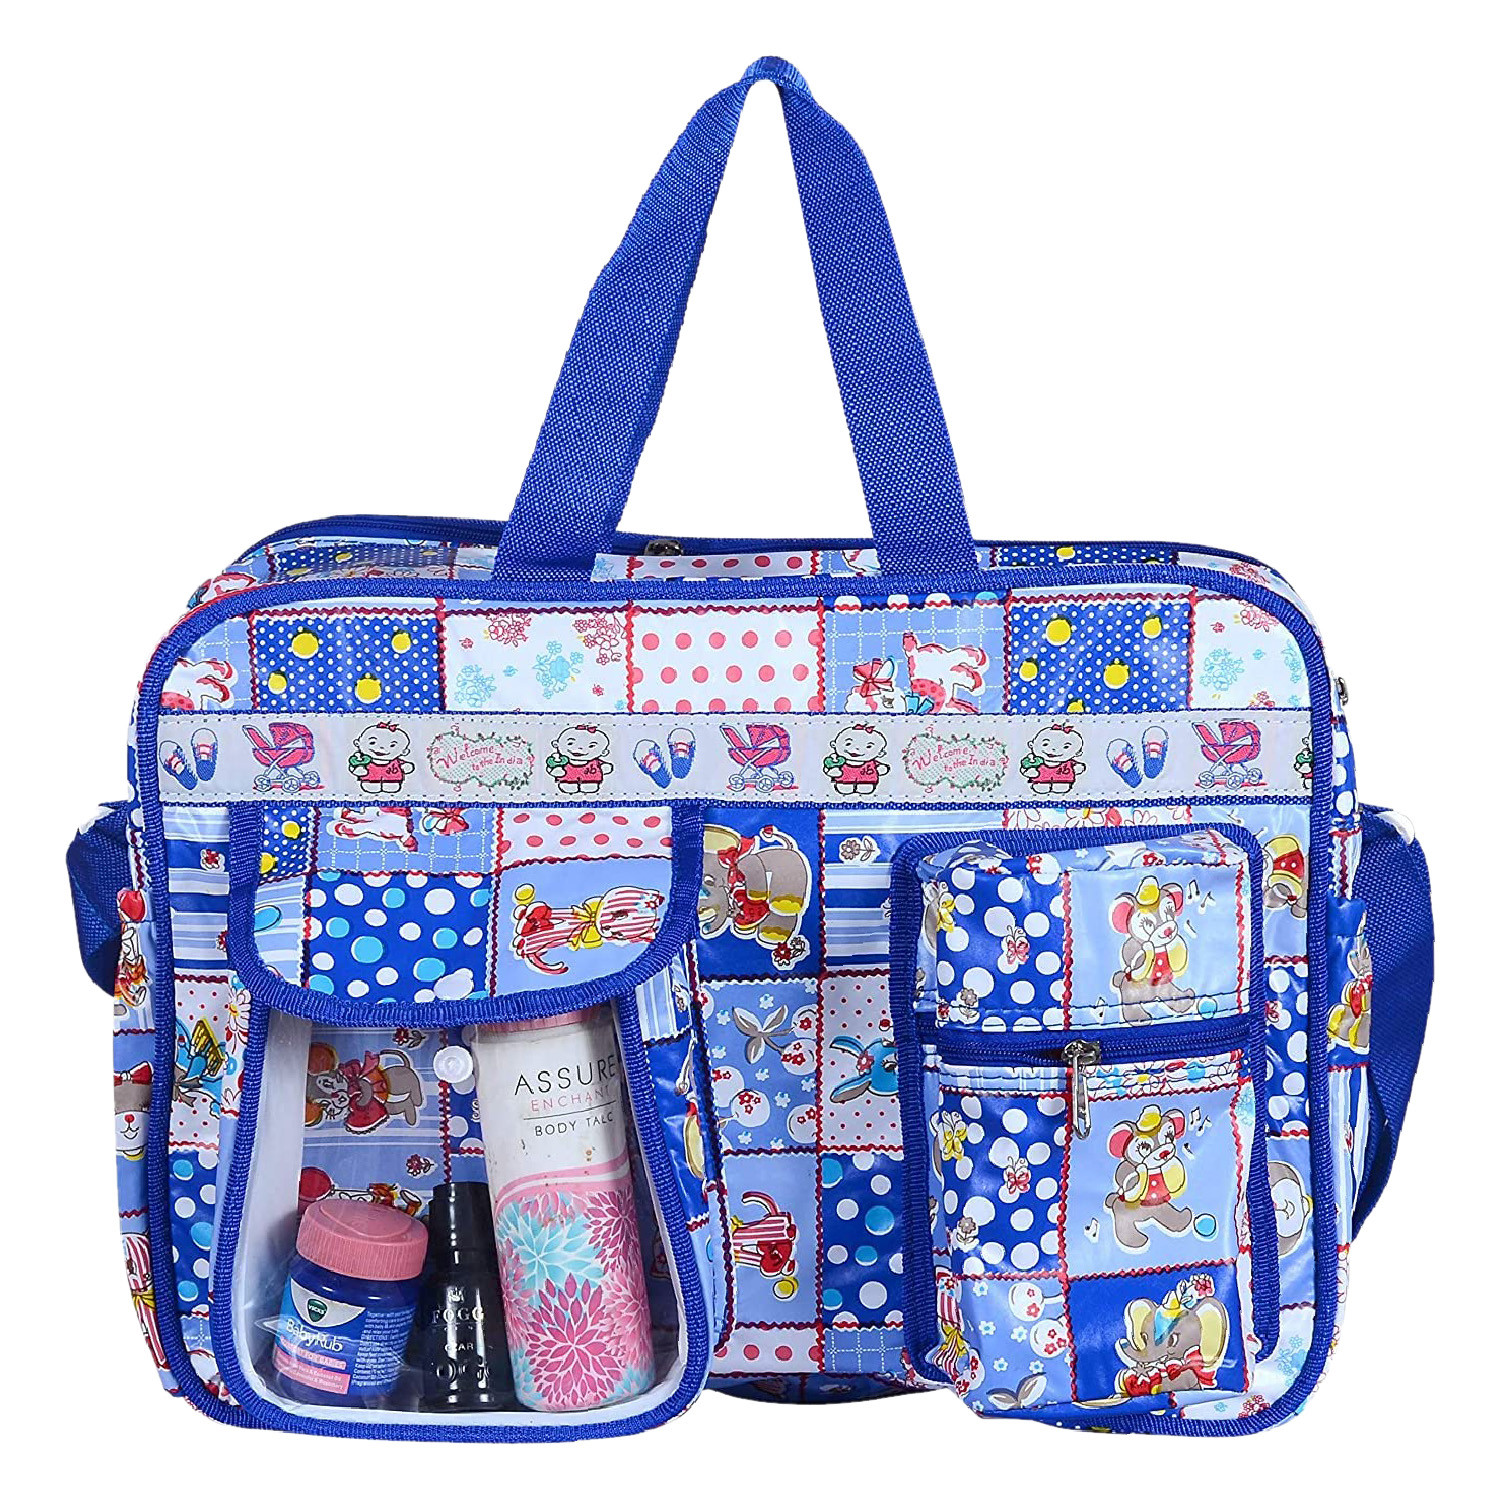 Kuber Industries PVC Multiuses Teddy Print Mothers Bag/Diapers Bag With Handle For Traveling, storing (Blue)